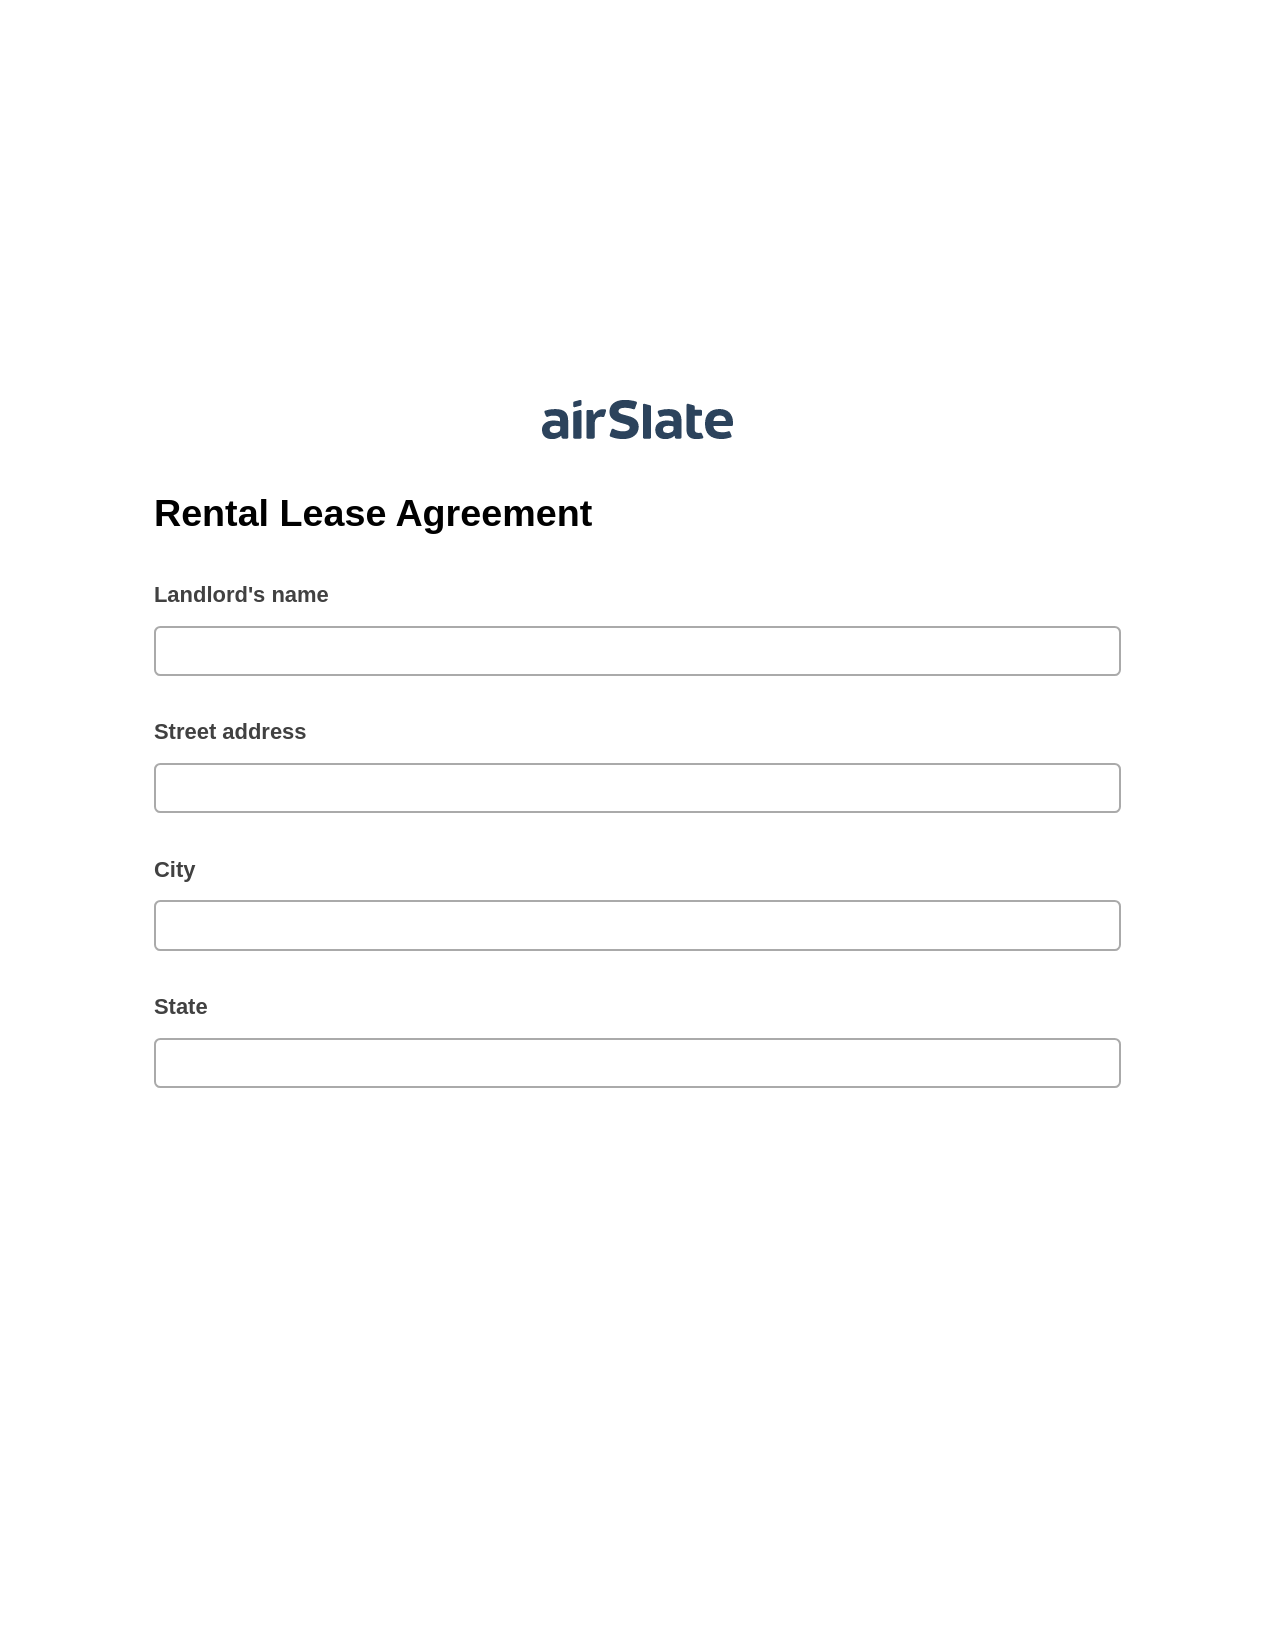 Rental Lease Agreement Pre-fill from Salesforce Record Bot, System Bot - Create a Slate in another Flow, OneDrive Bot